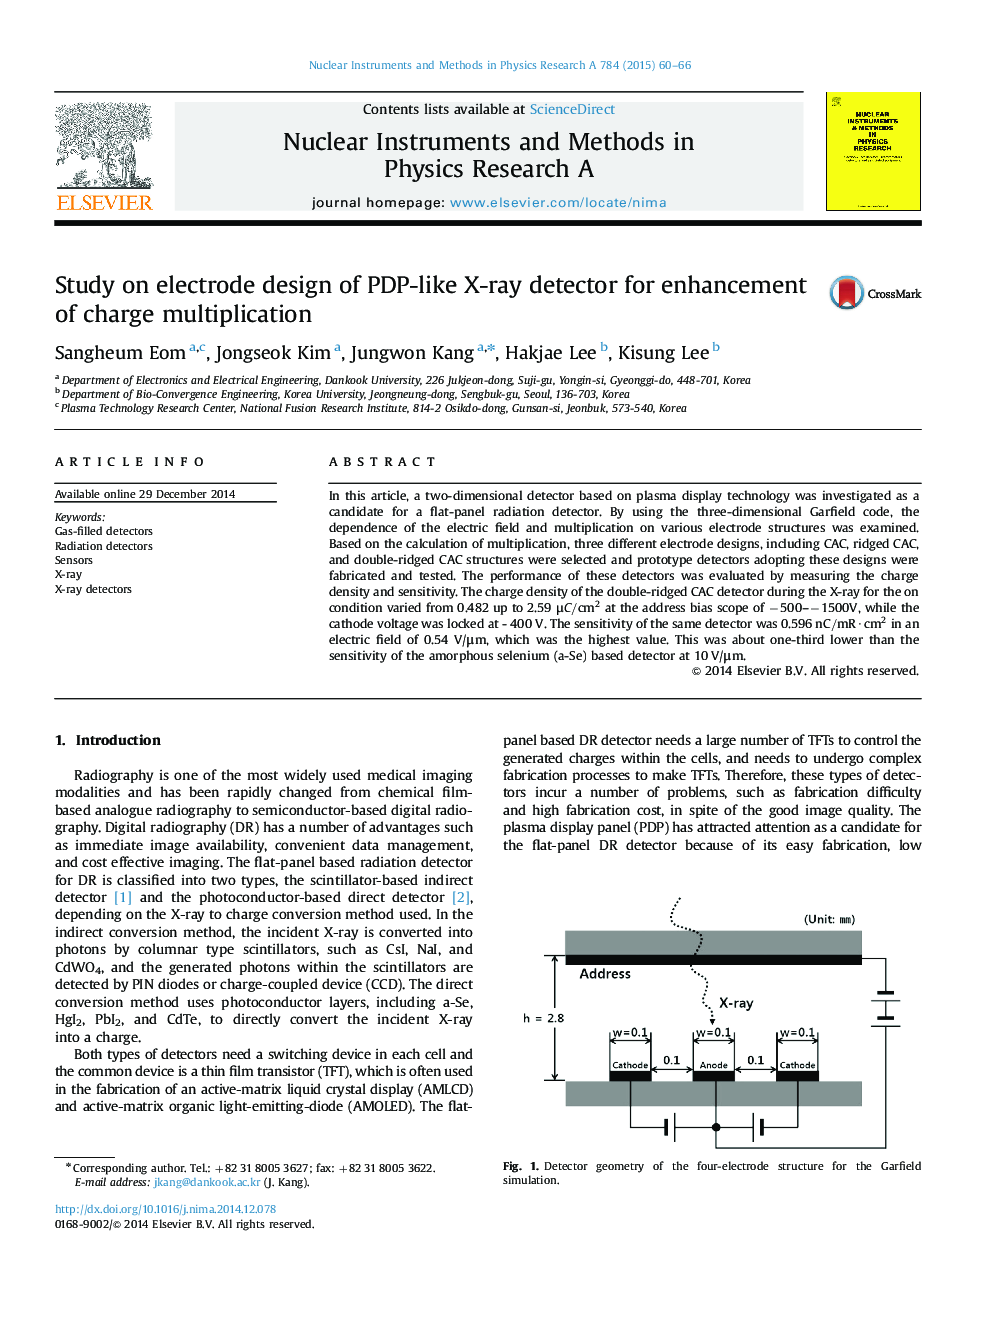 Study on electrode design of PDP-like X-ray detector for enhancement of charge multiplication